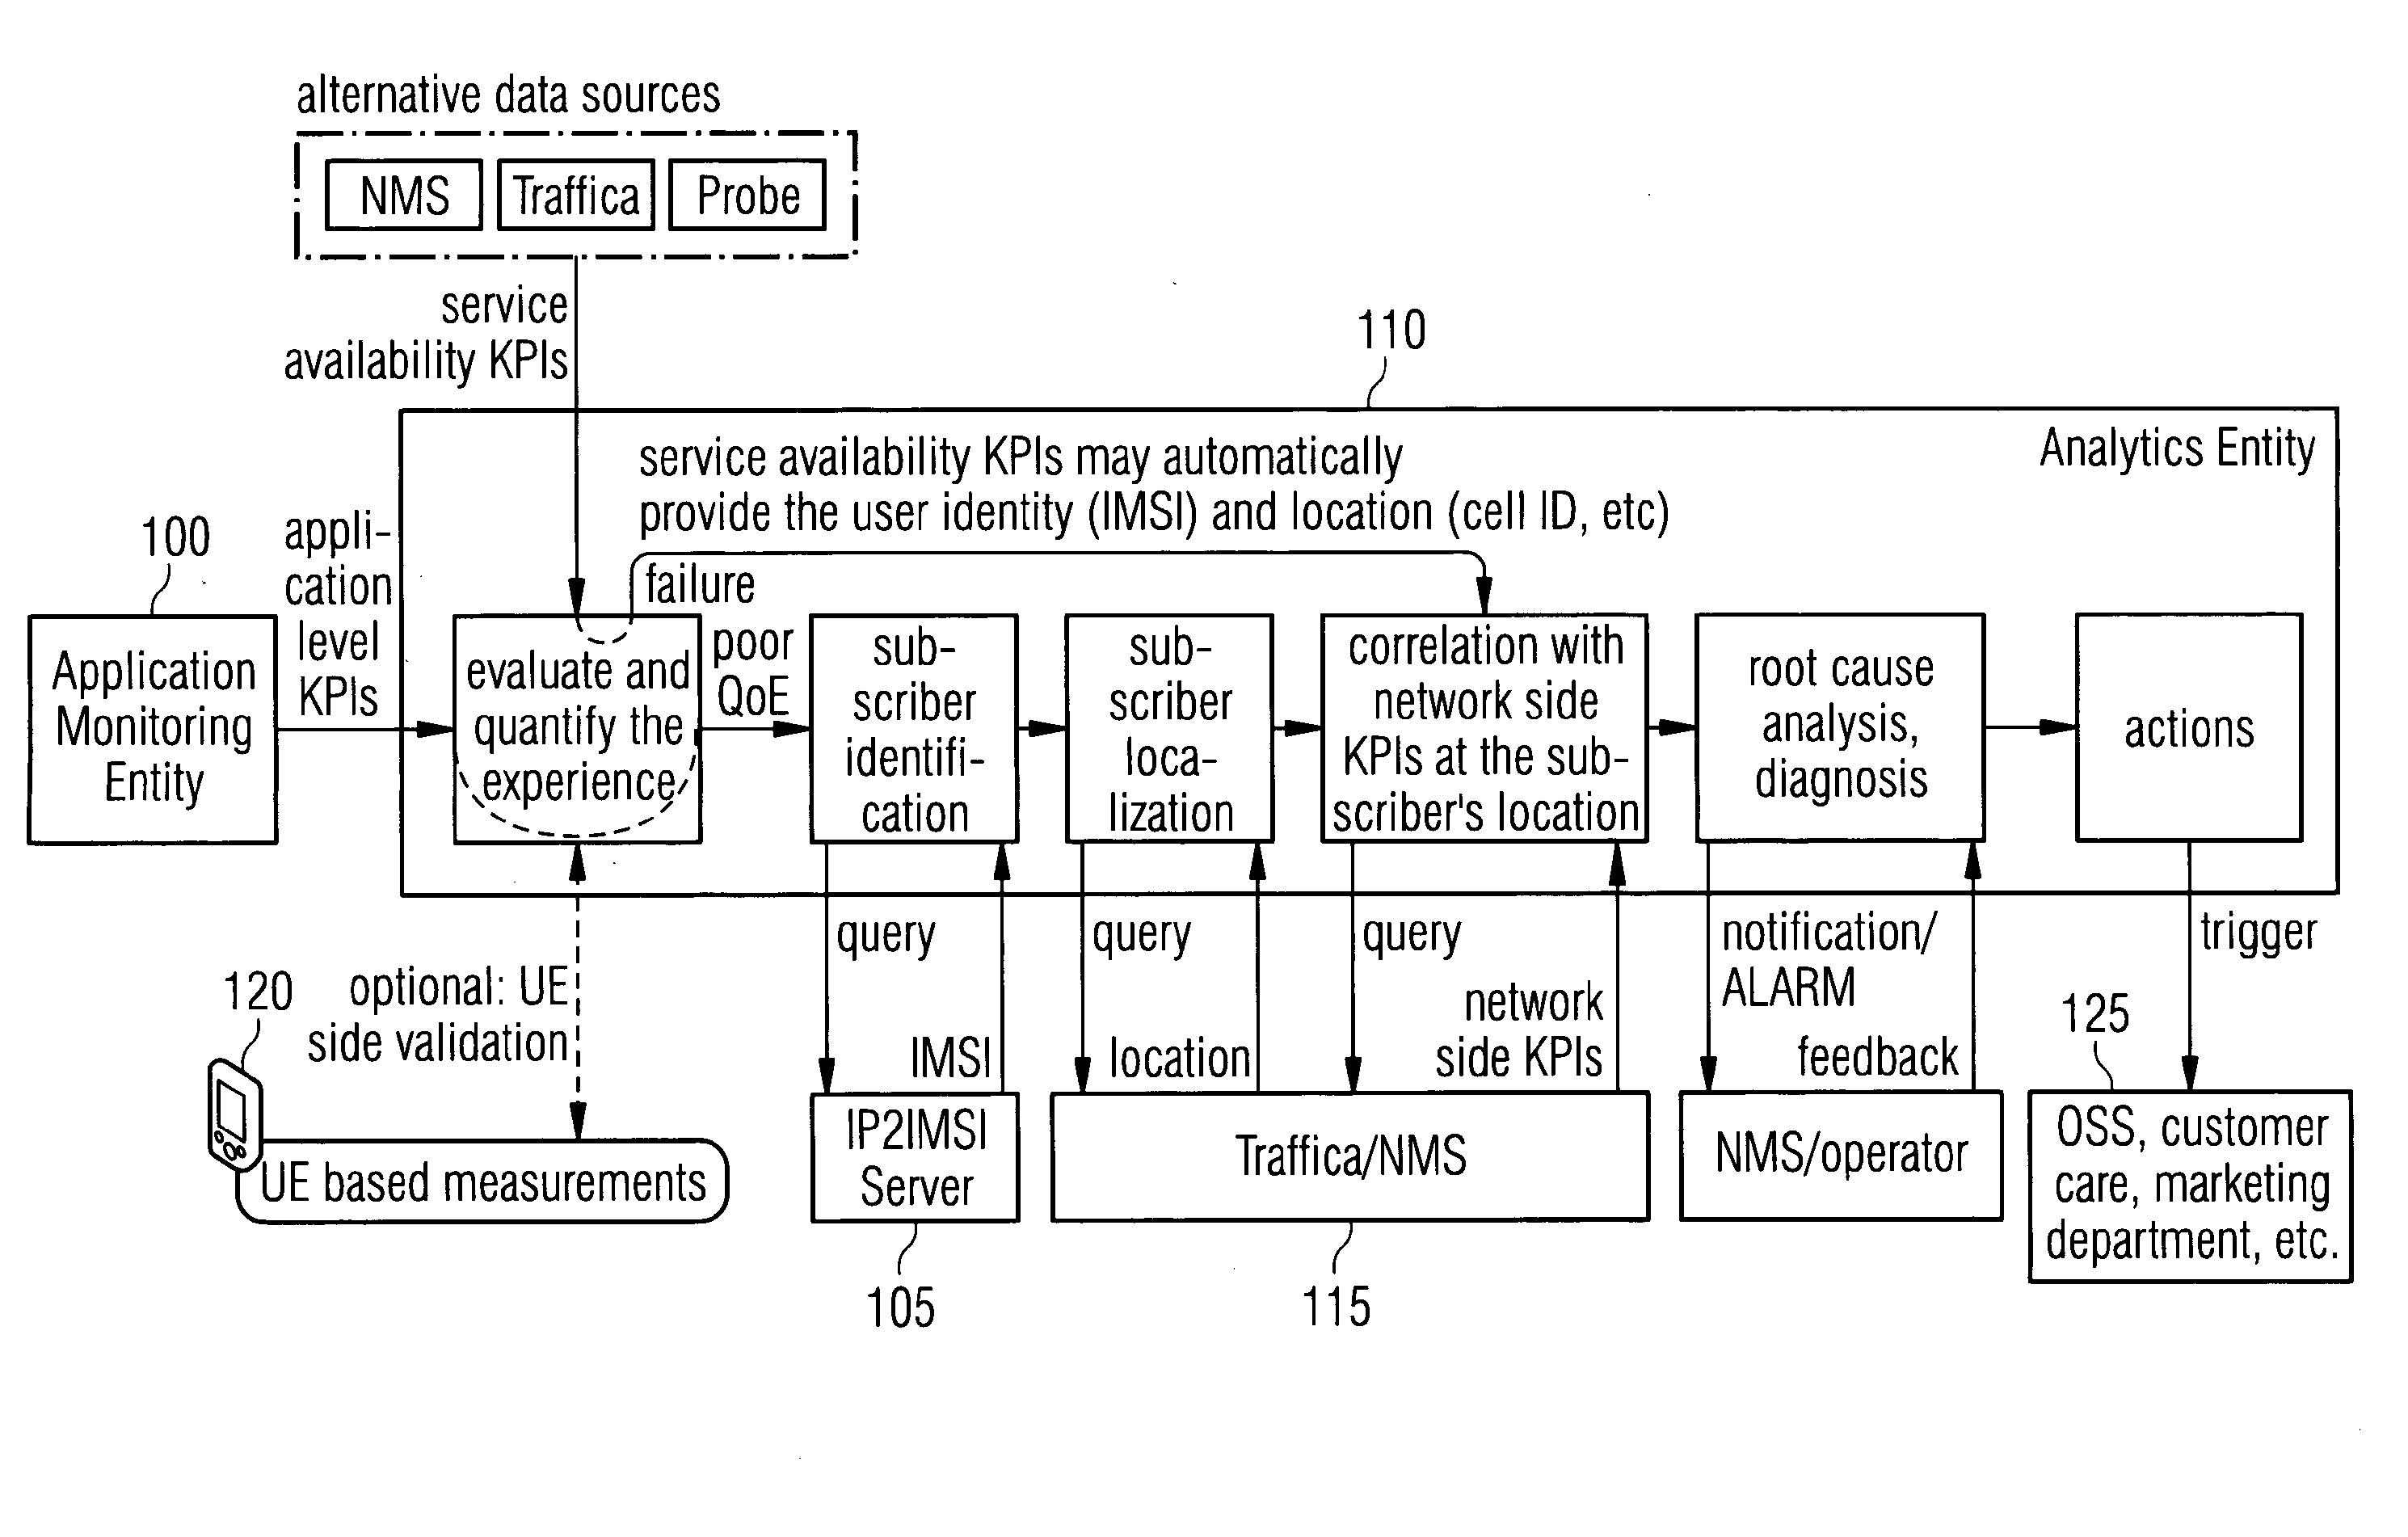 Method and apparatus for generating insight into the customer experience of web based applications